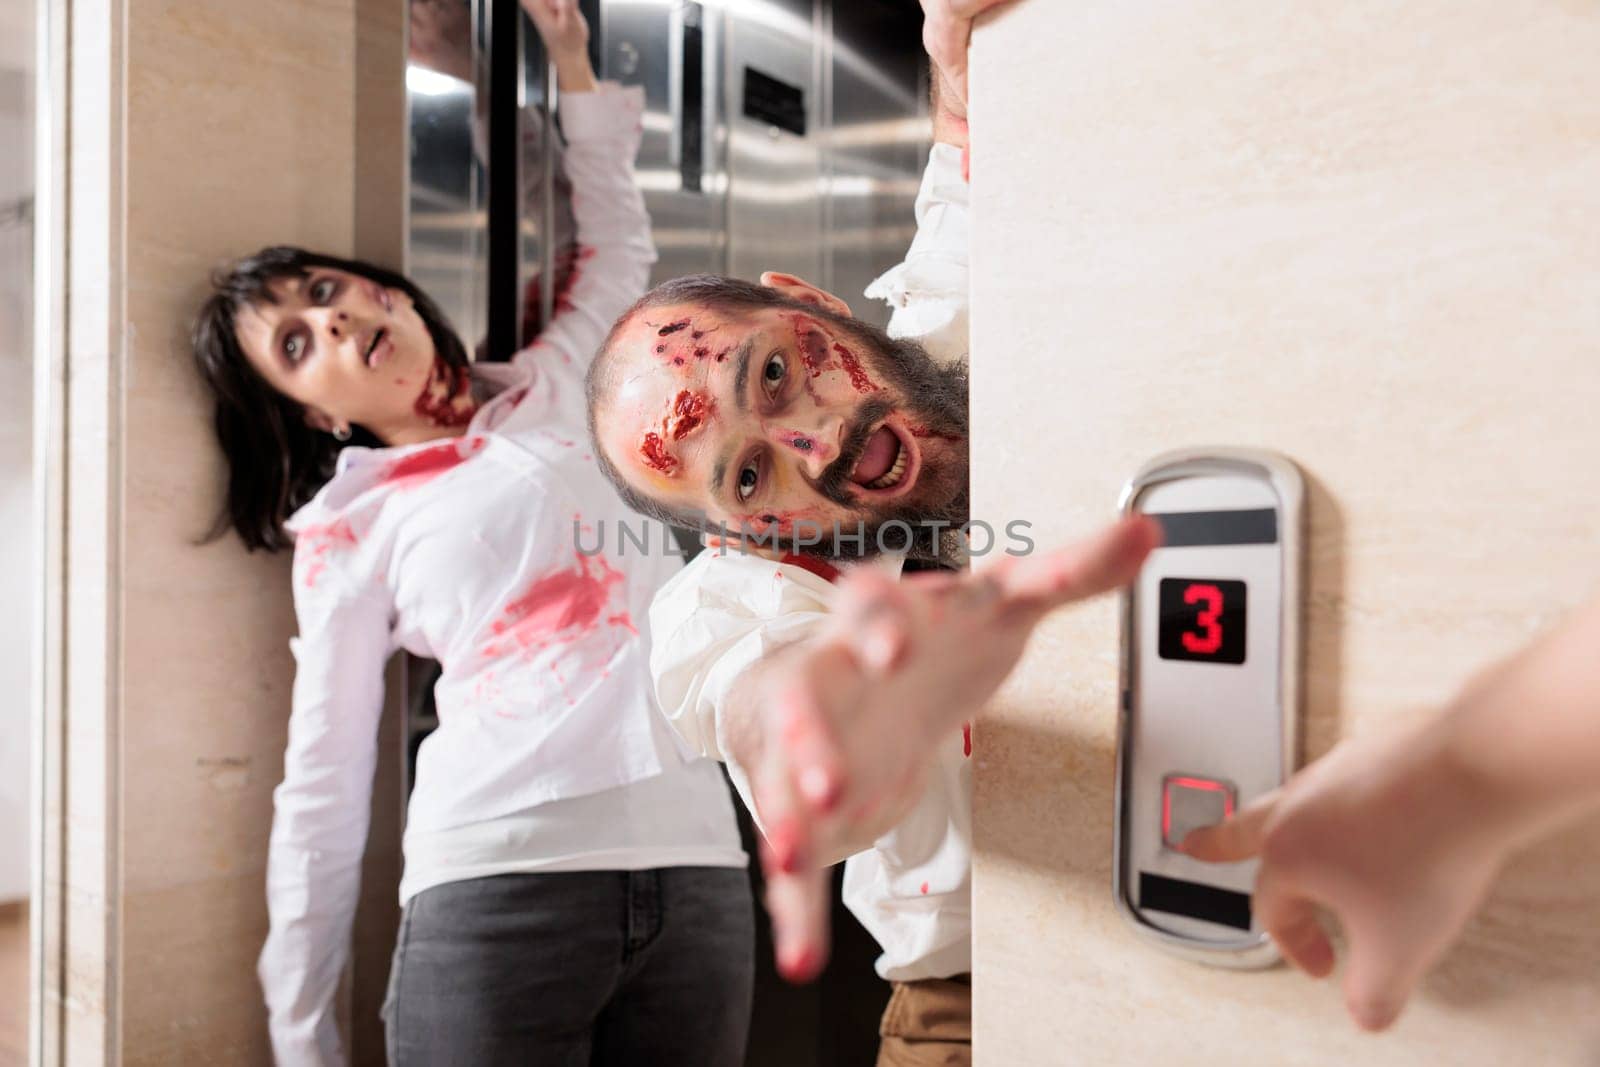 Actors playing zombies in horror movie scene coming out of elevator by DCStudio